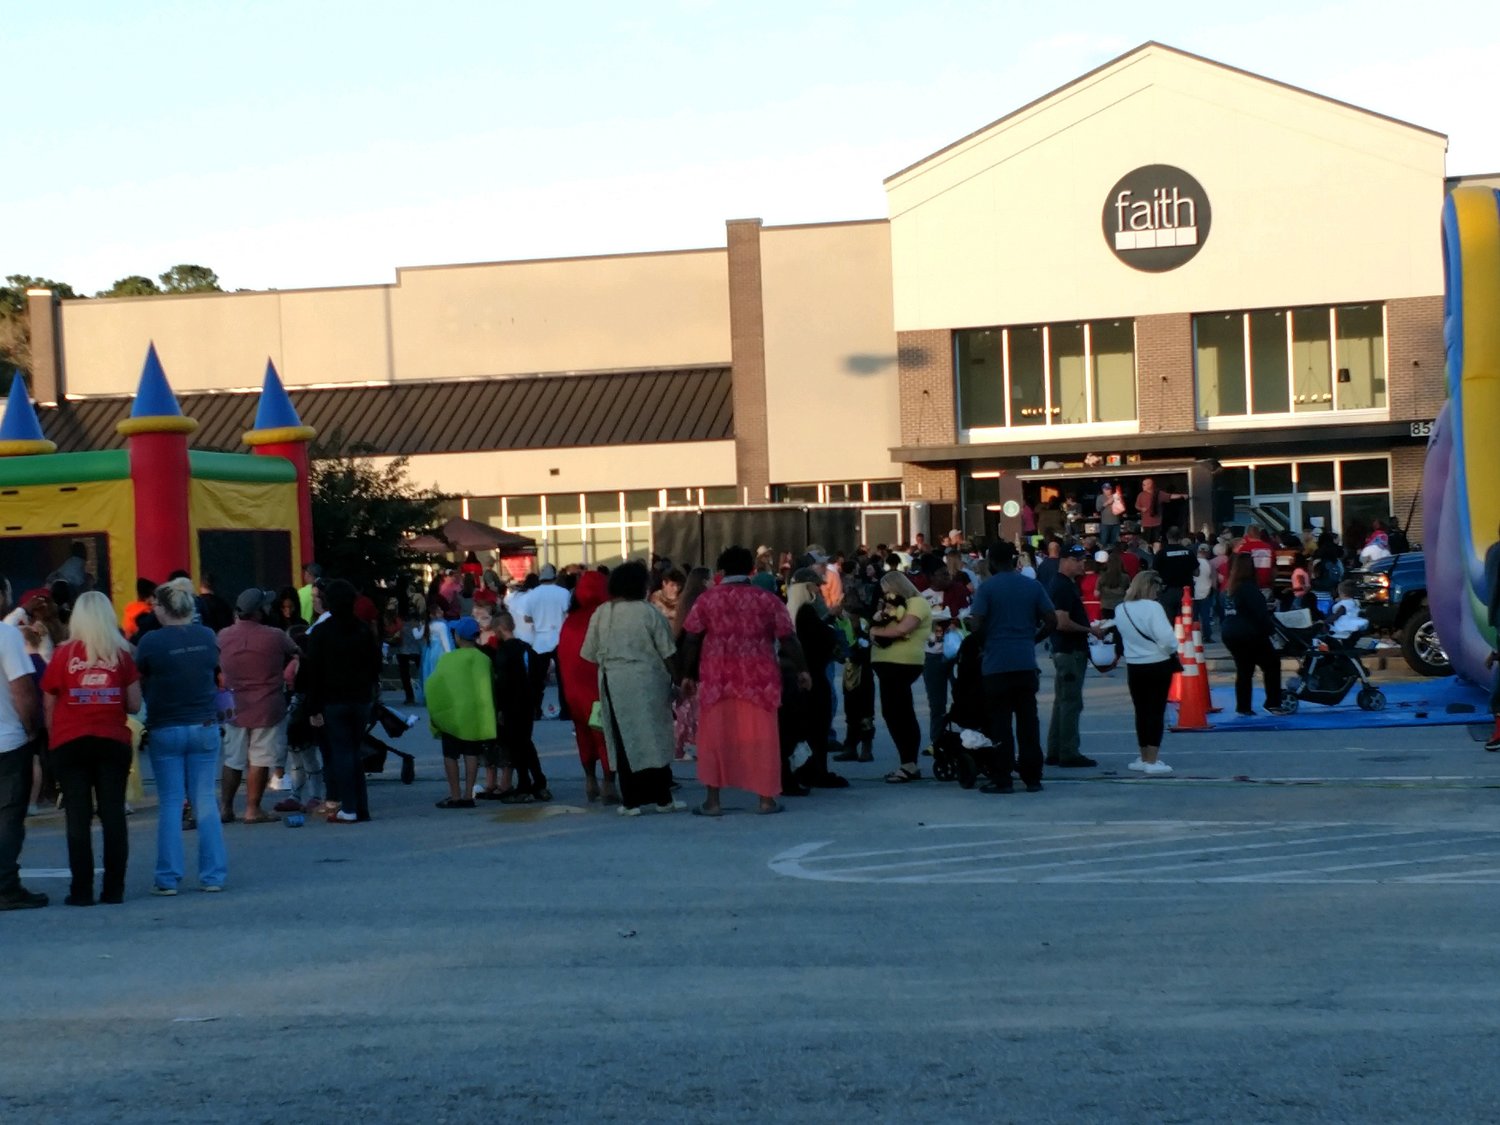 FESTIVAL GOERS. A community-wide Harvest Festival was held on Sunday, October 31st at the Faith Church parking lot on Bells Highway in Walterboro. From 4:00-7:00 p.m., costumed children enjoyed giant jump castles, slides, obstacle courses, carnival games, Trunk or Treat, food and fun.